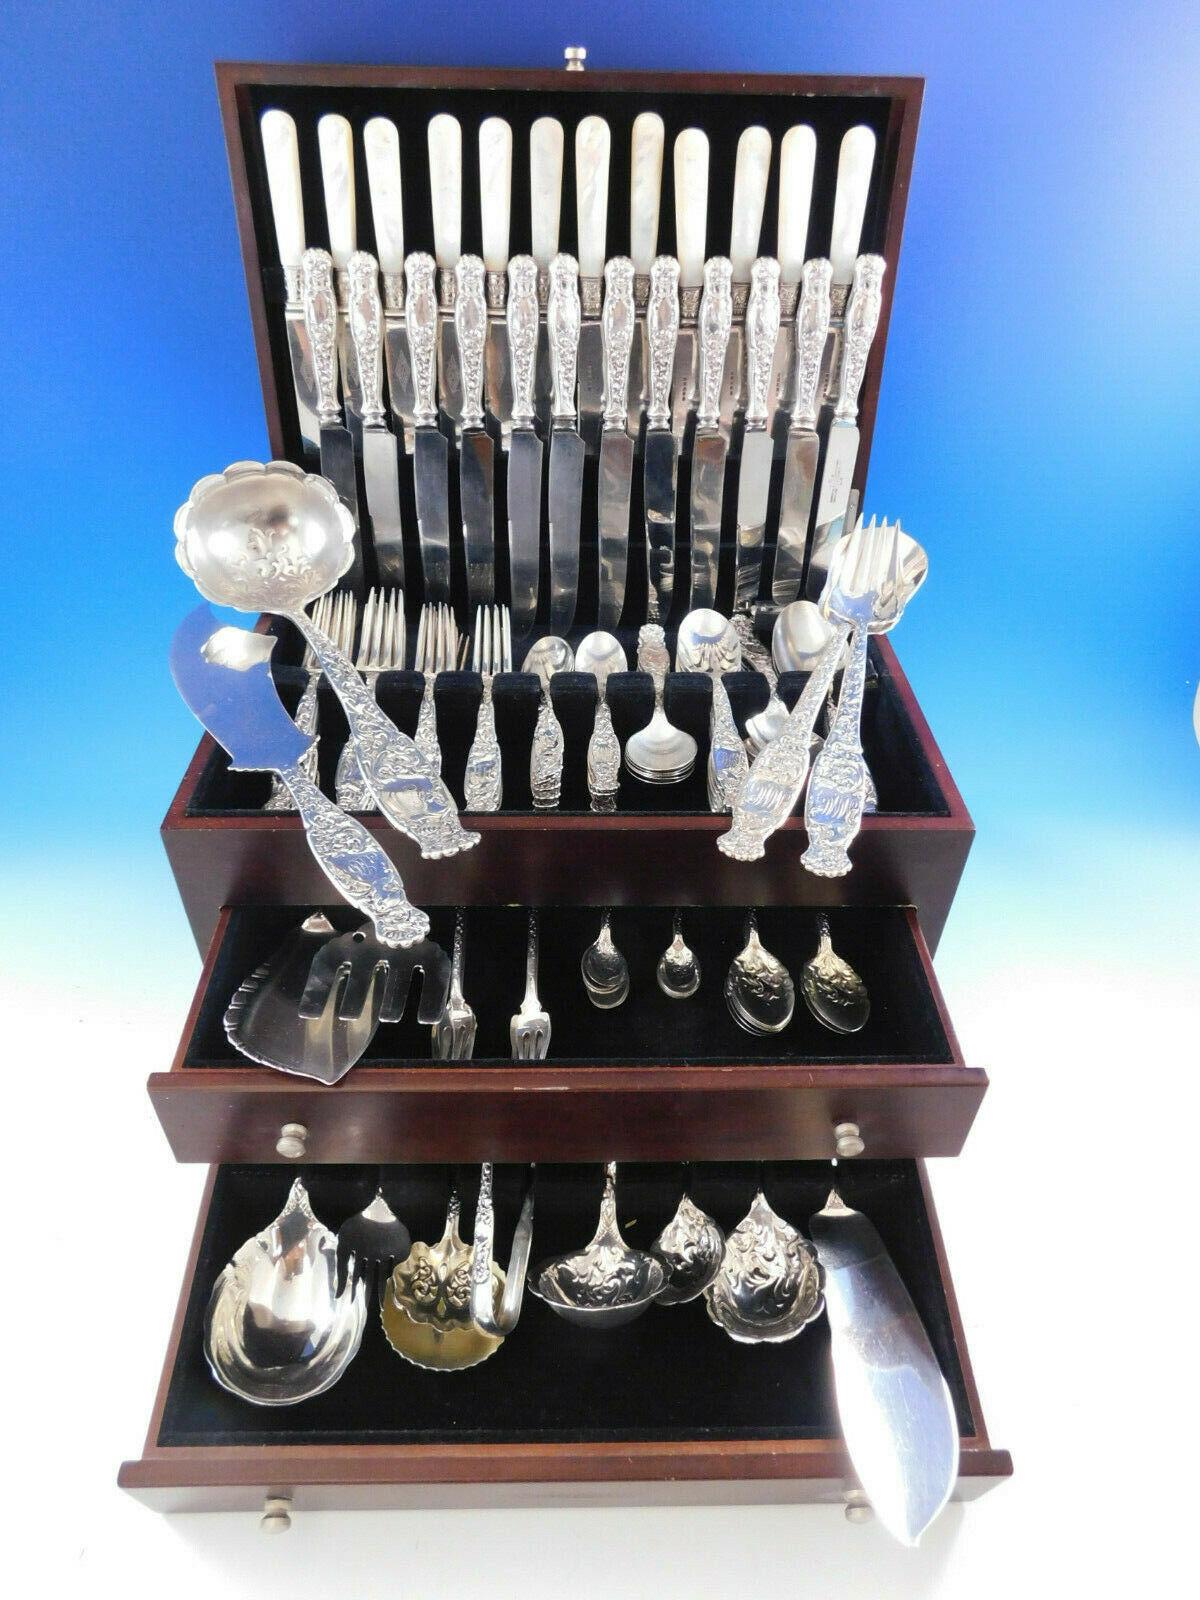 Superb Heraldic by Whiting sterling silver flatware set - 135 pieces. Heraldic is scarce, circa 1880, multi-motif pattern that features bold scrolling leaves flowing down the handle around a shield-shaped cartouche below a knight's helmet.

This set